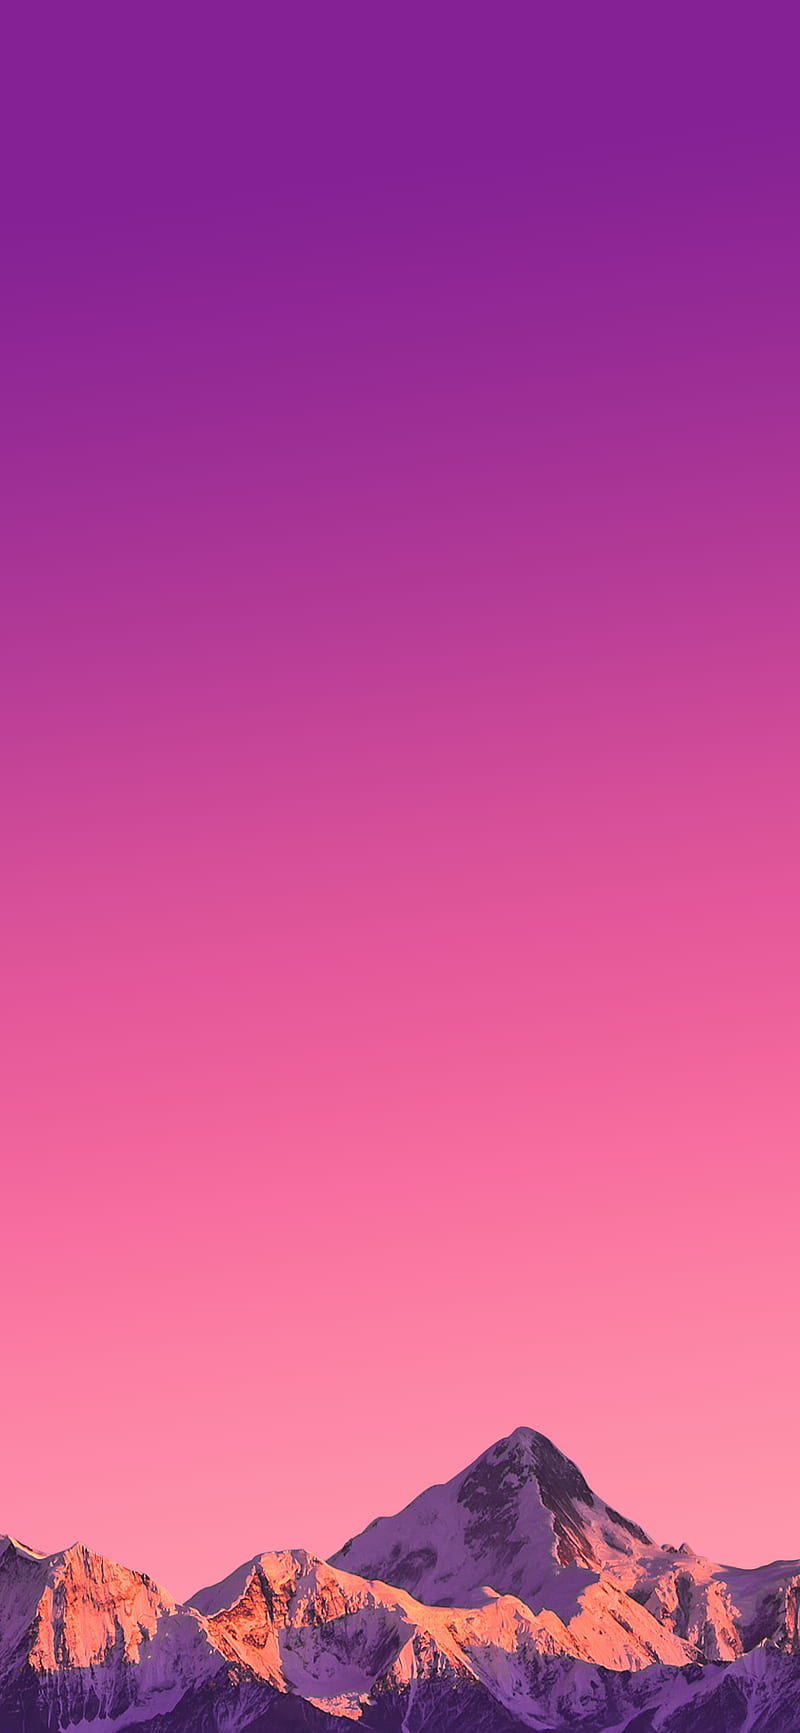 Download Gradient wallpapers for mobile phone free Gradient HD pictures